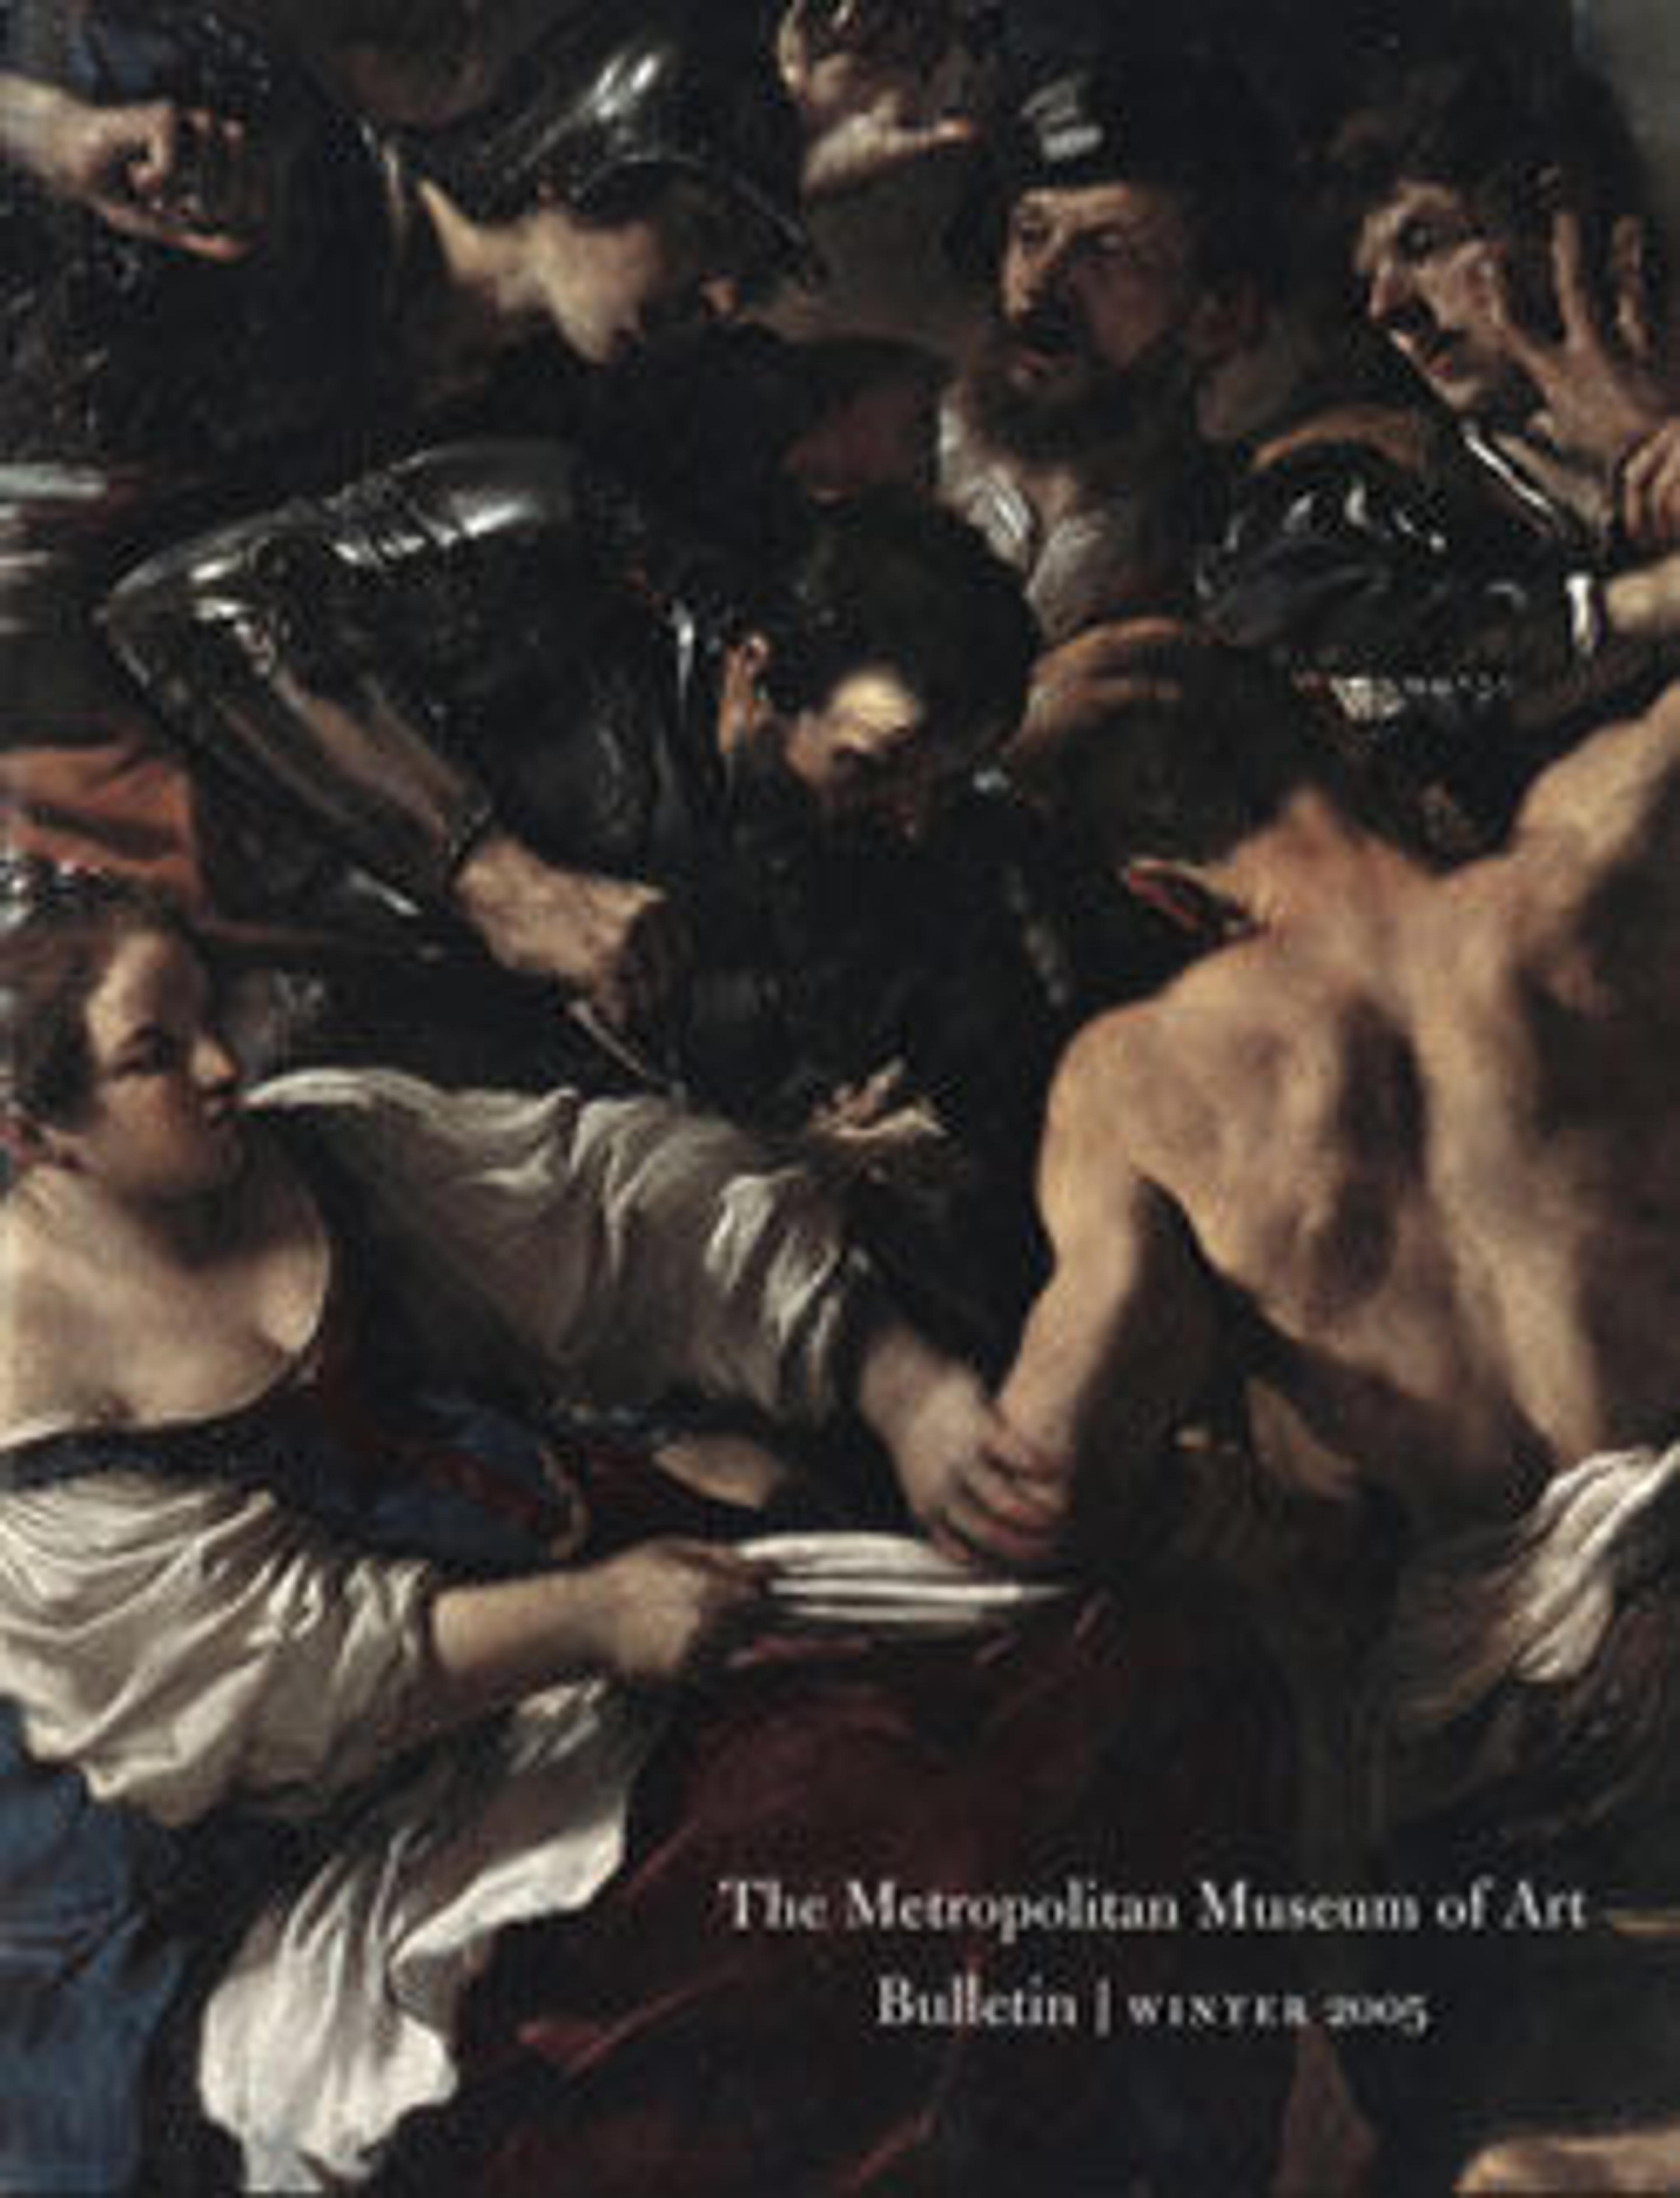 "Going for Baroque: Bringing 17th-Century Masters to the Met": The Metropolitan Museum of Art Bulletin, v. 62 no. 3 (Winter, 2005)